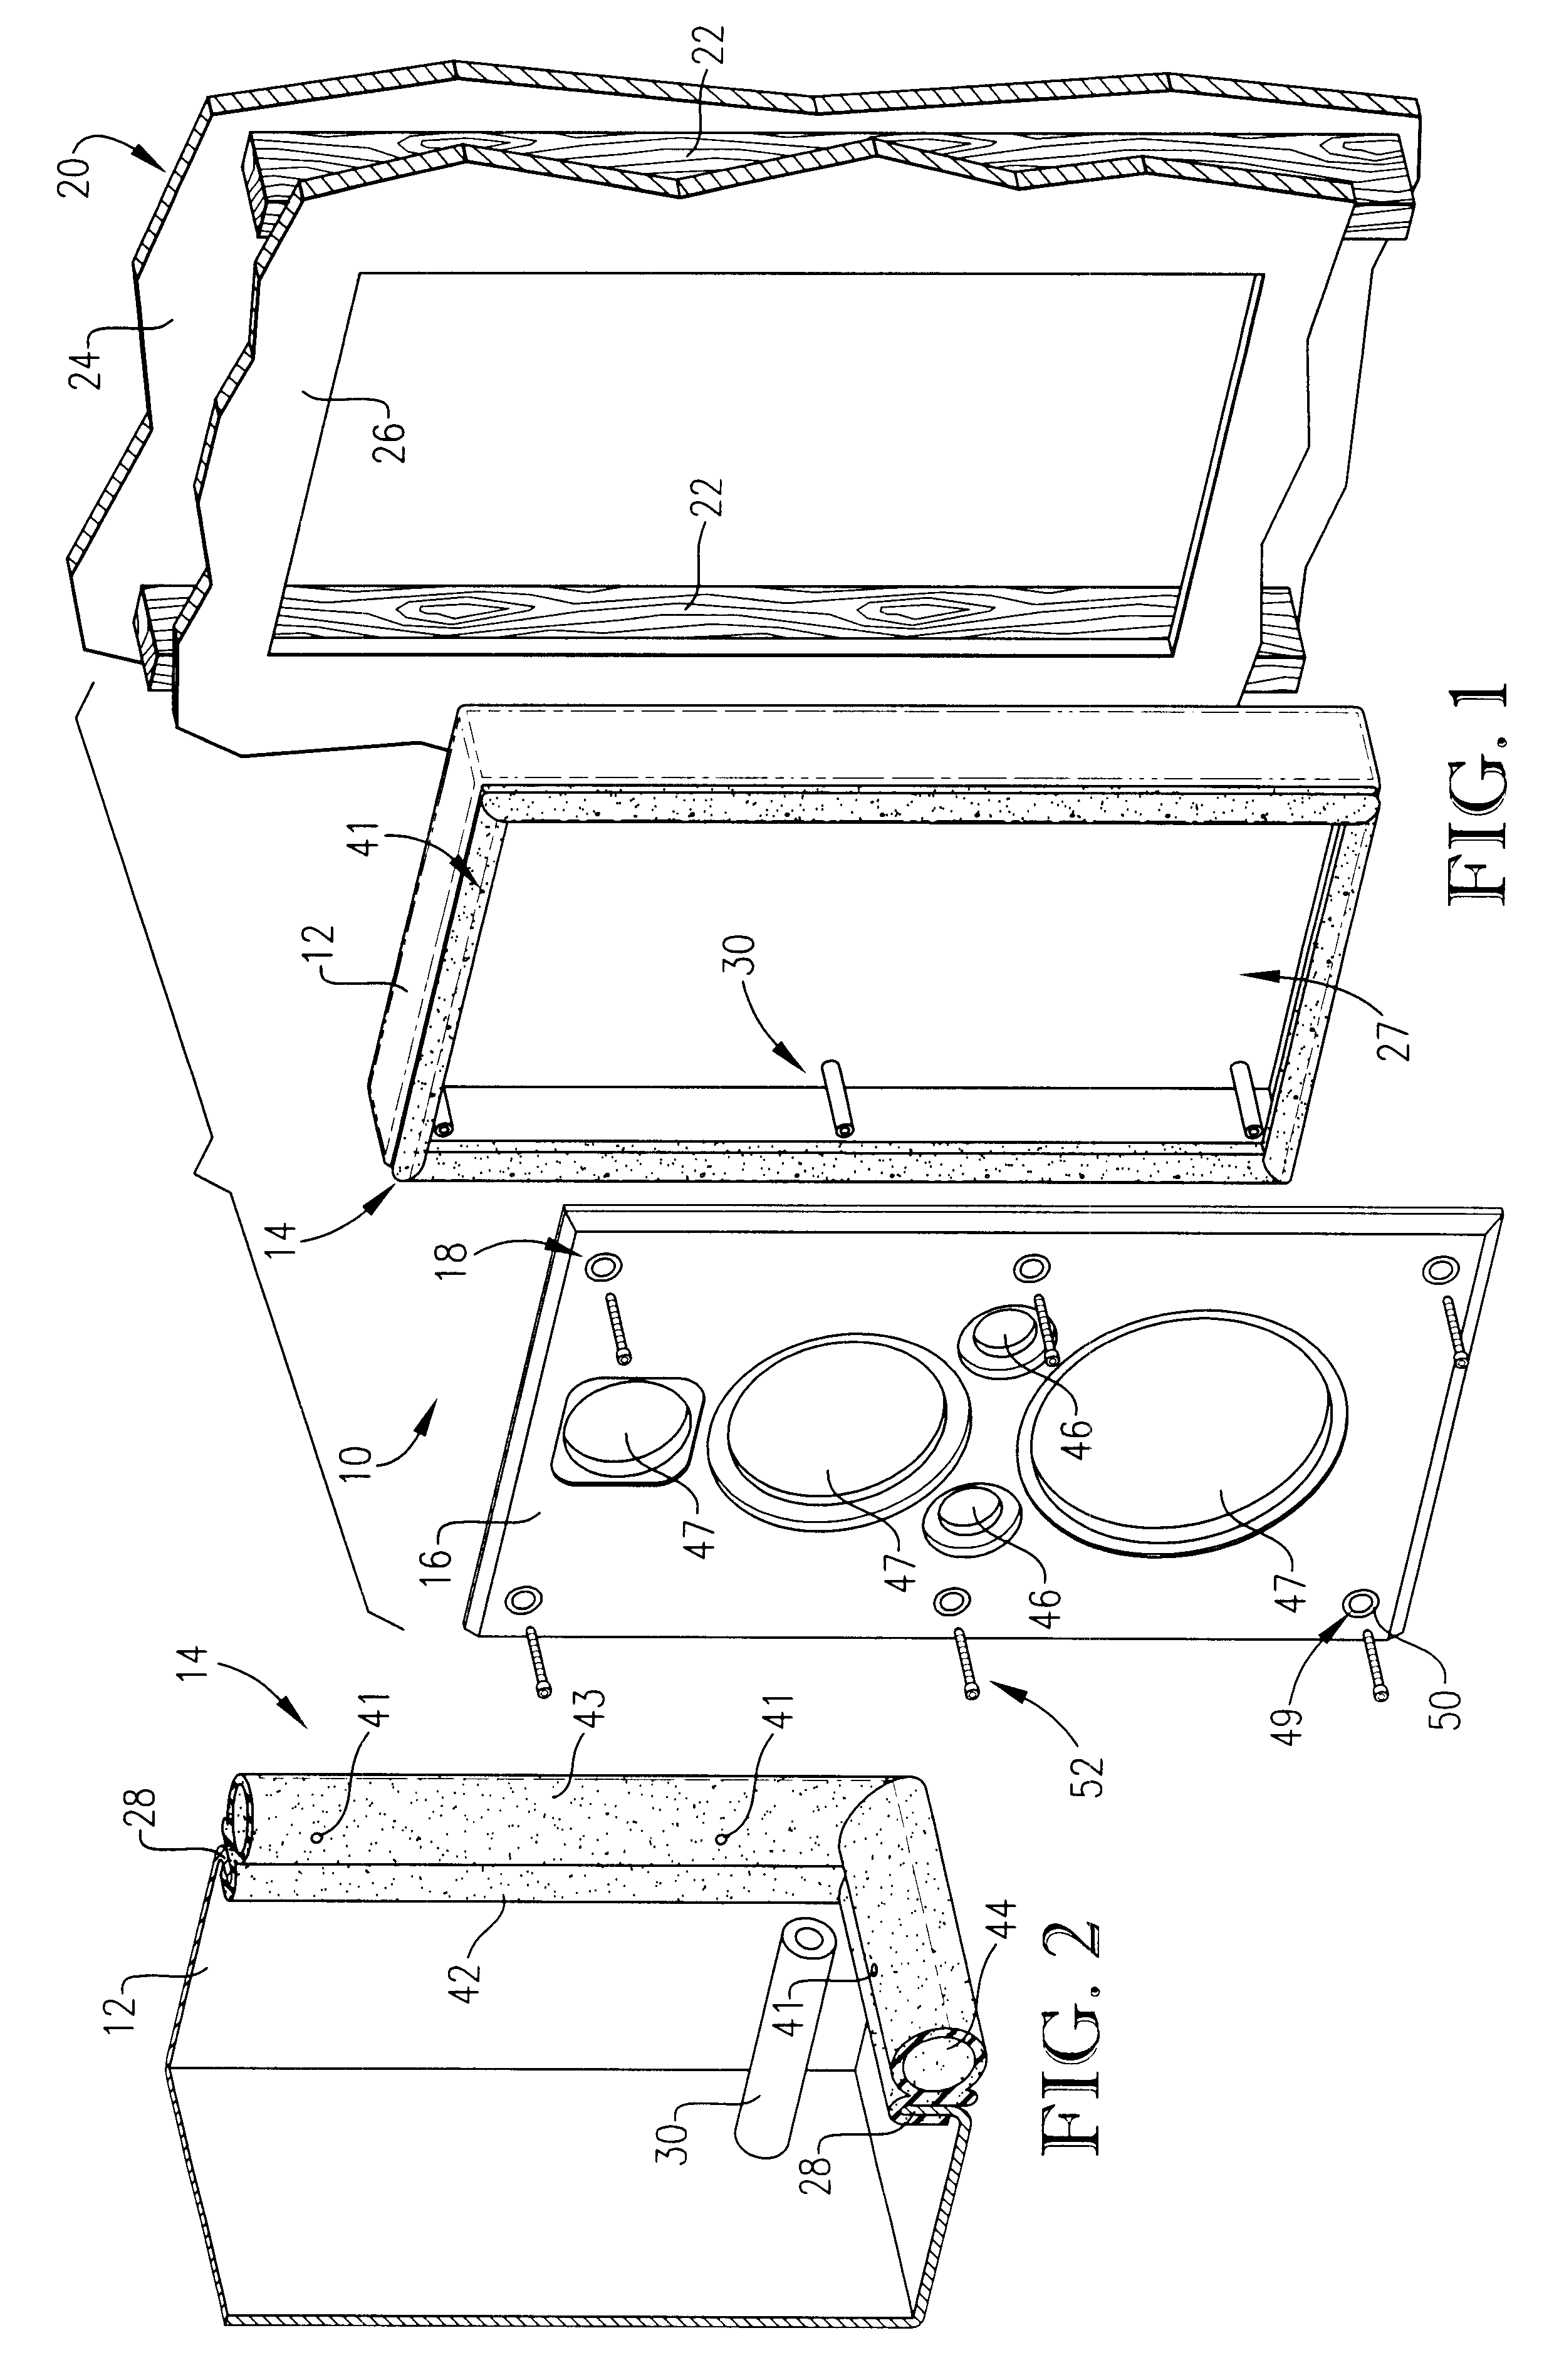 Speaker enclosure and mounting method for isolating and insulating faceplate and speakers from a surrounding mounting surface